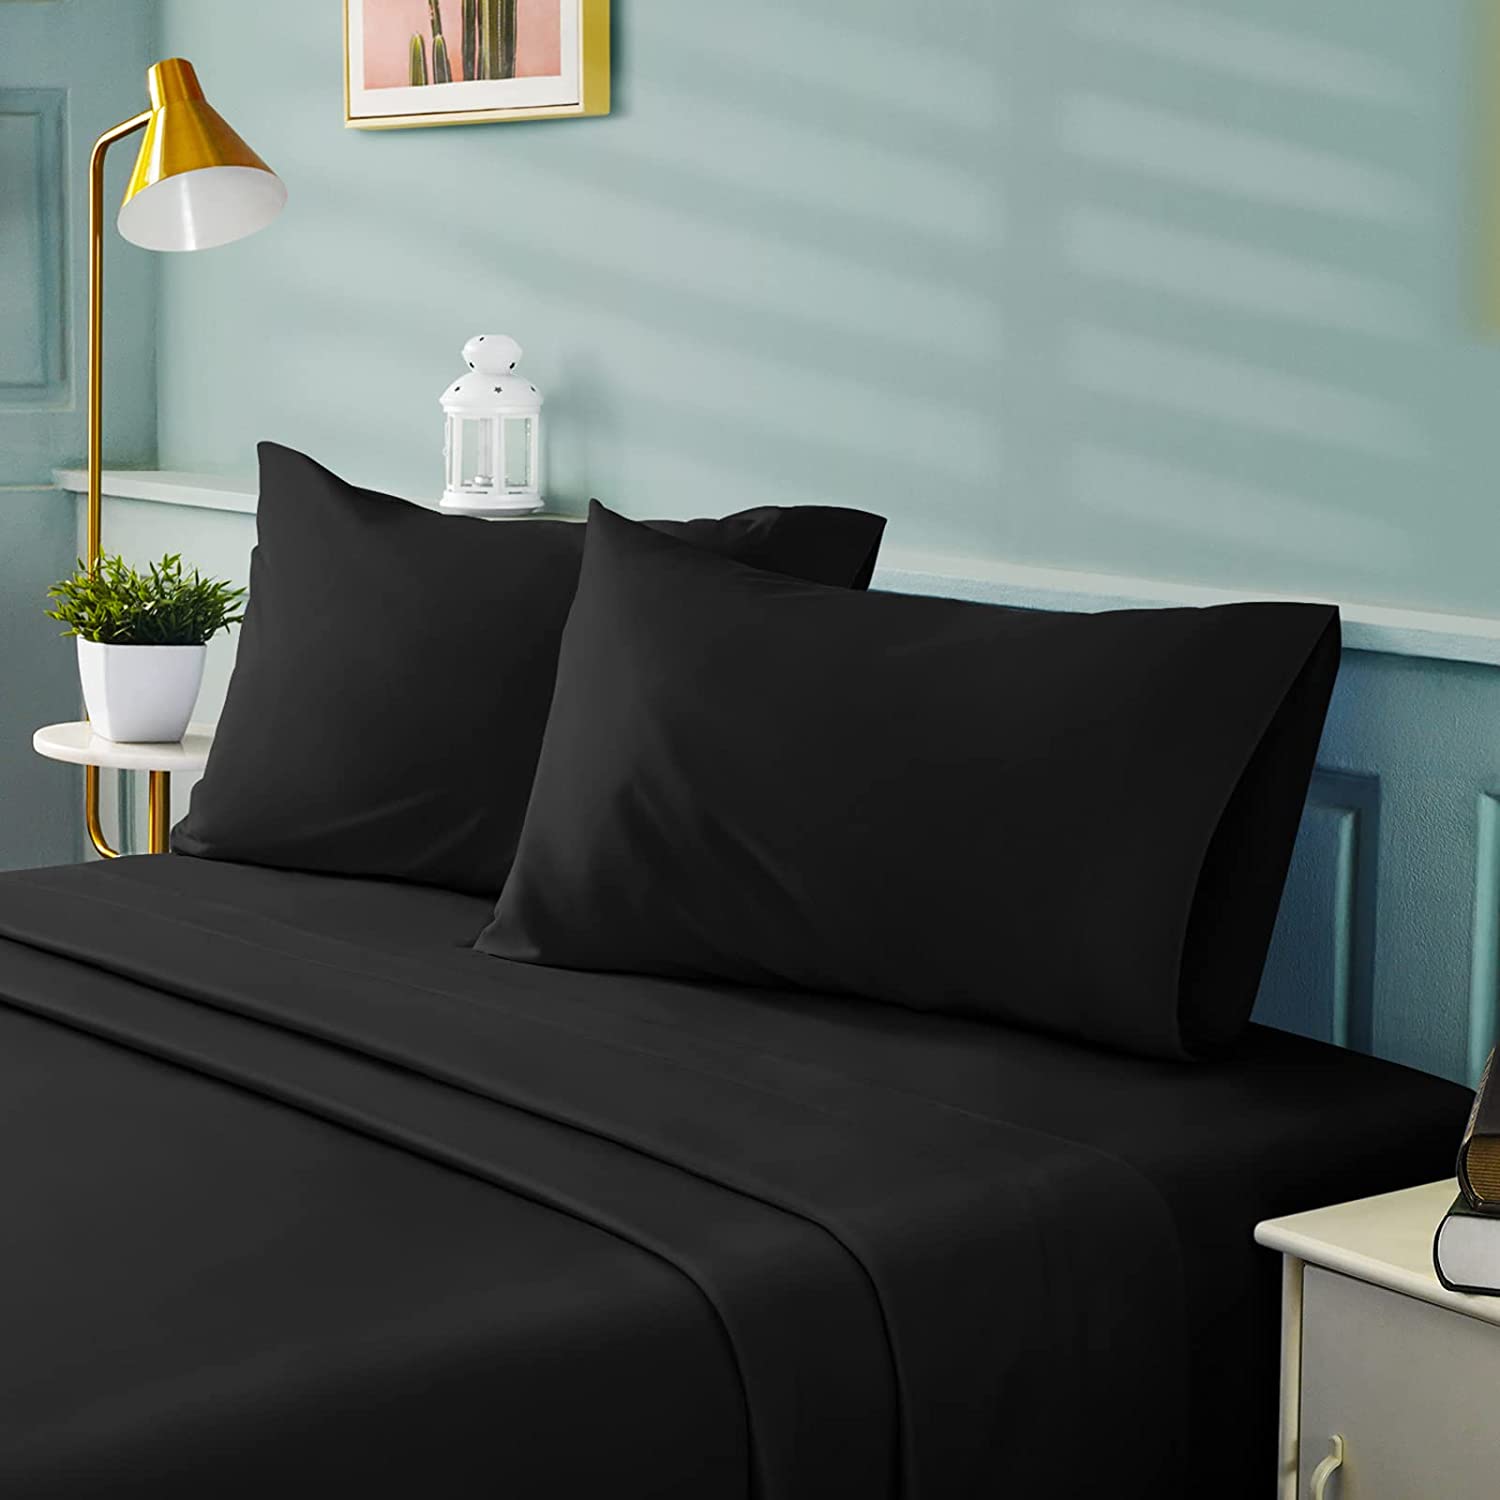 Twin-XL Flat Sheet Black Egyptian Cotton 1000 Thread Count at- Egyptianhomelinens.com